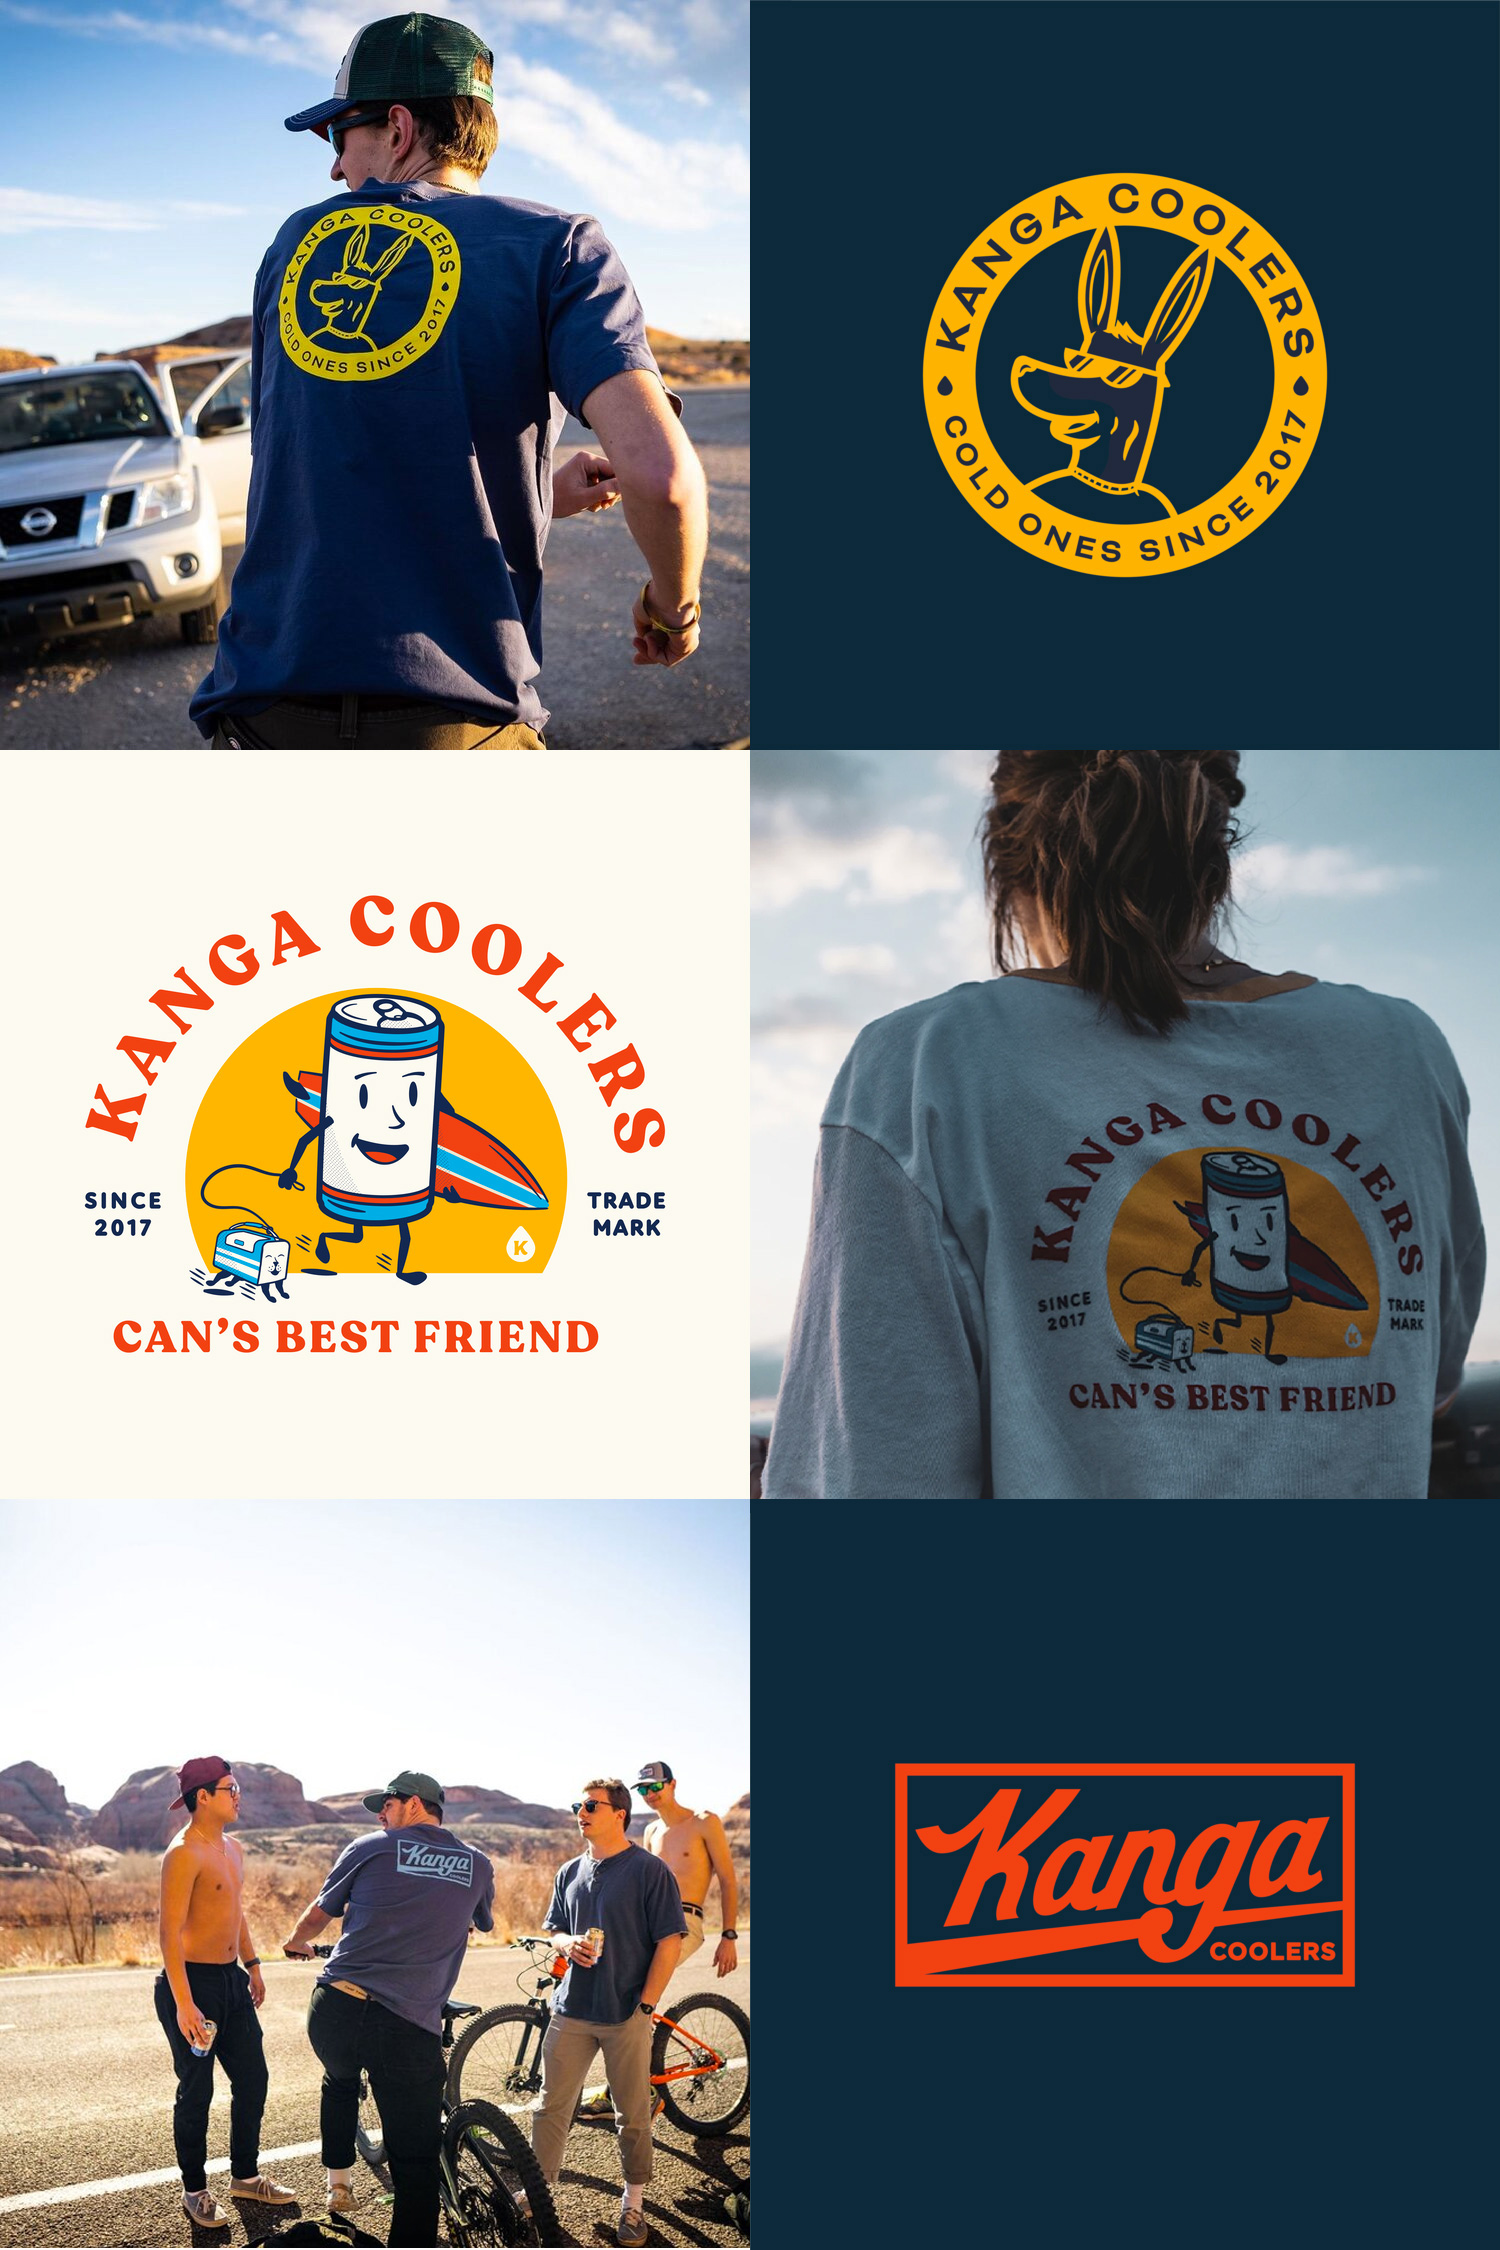 New Logo and Identity for Kanga by Chris Ganz Designs